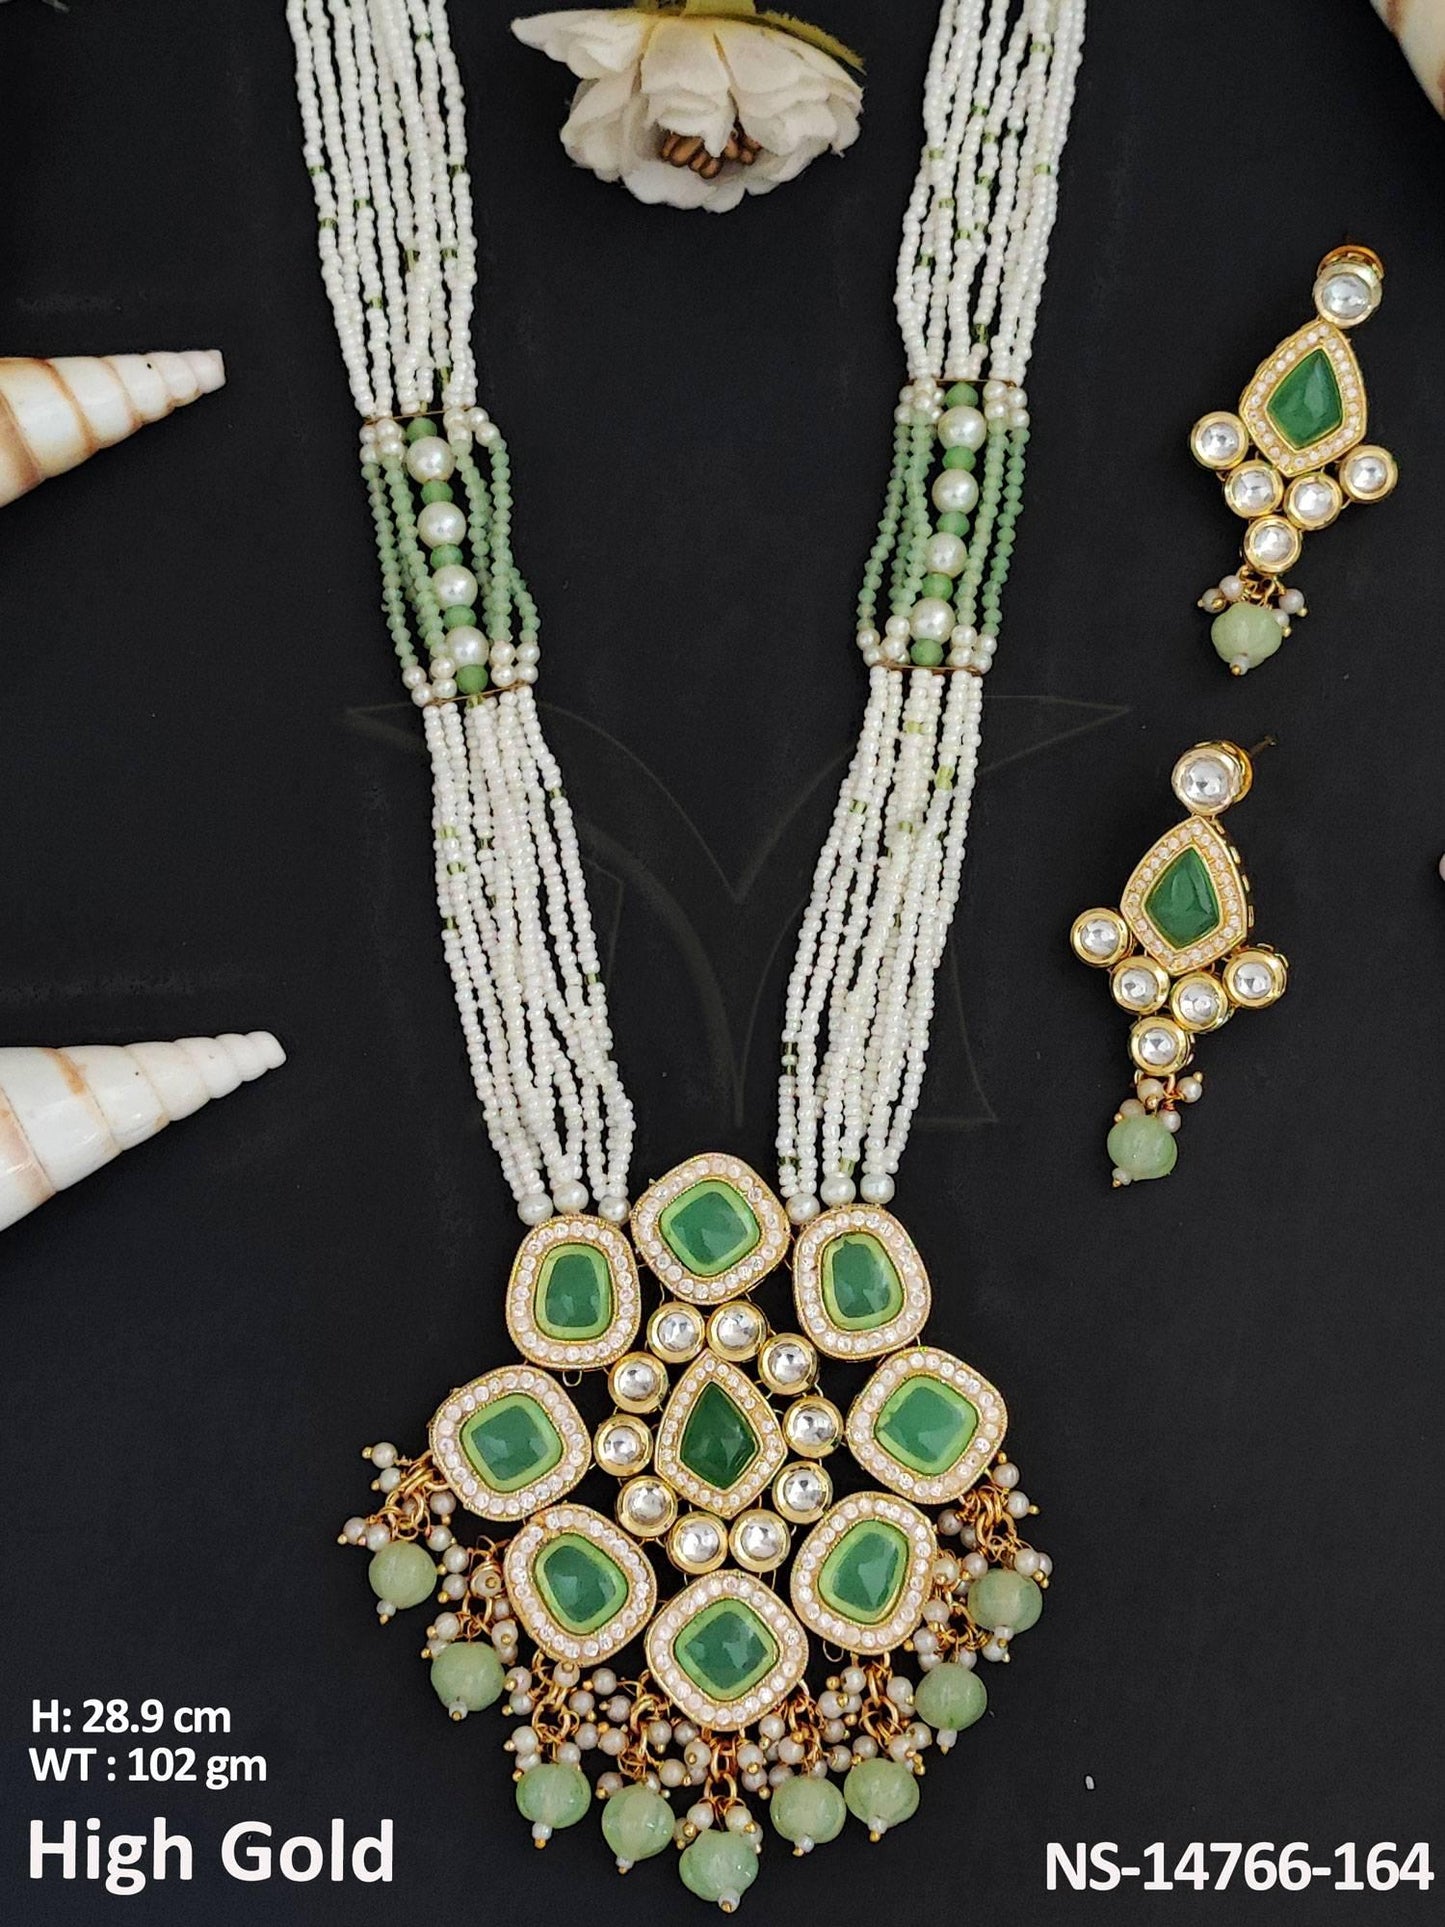 This Kundan Jewellery set features a fancy long necklace with high gold polish, crafted from brass metal.